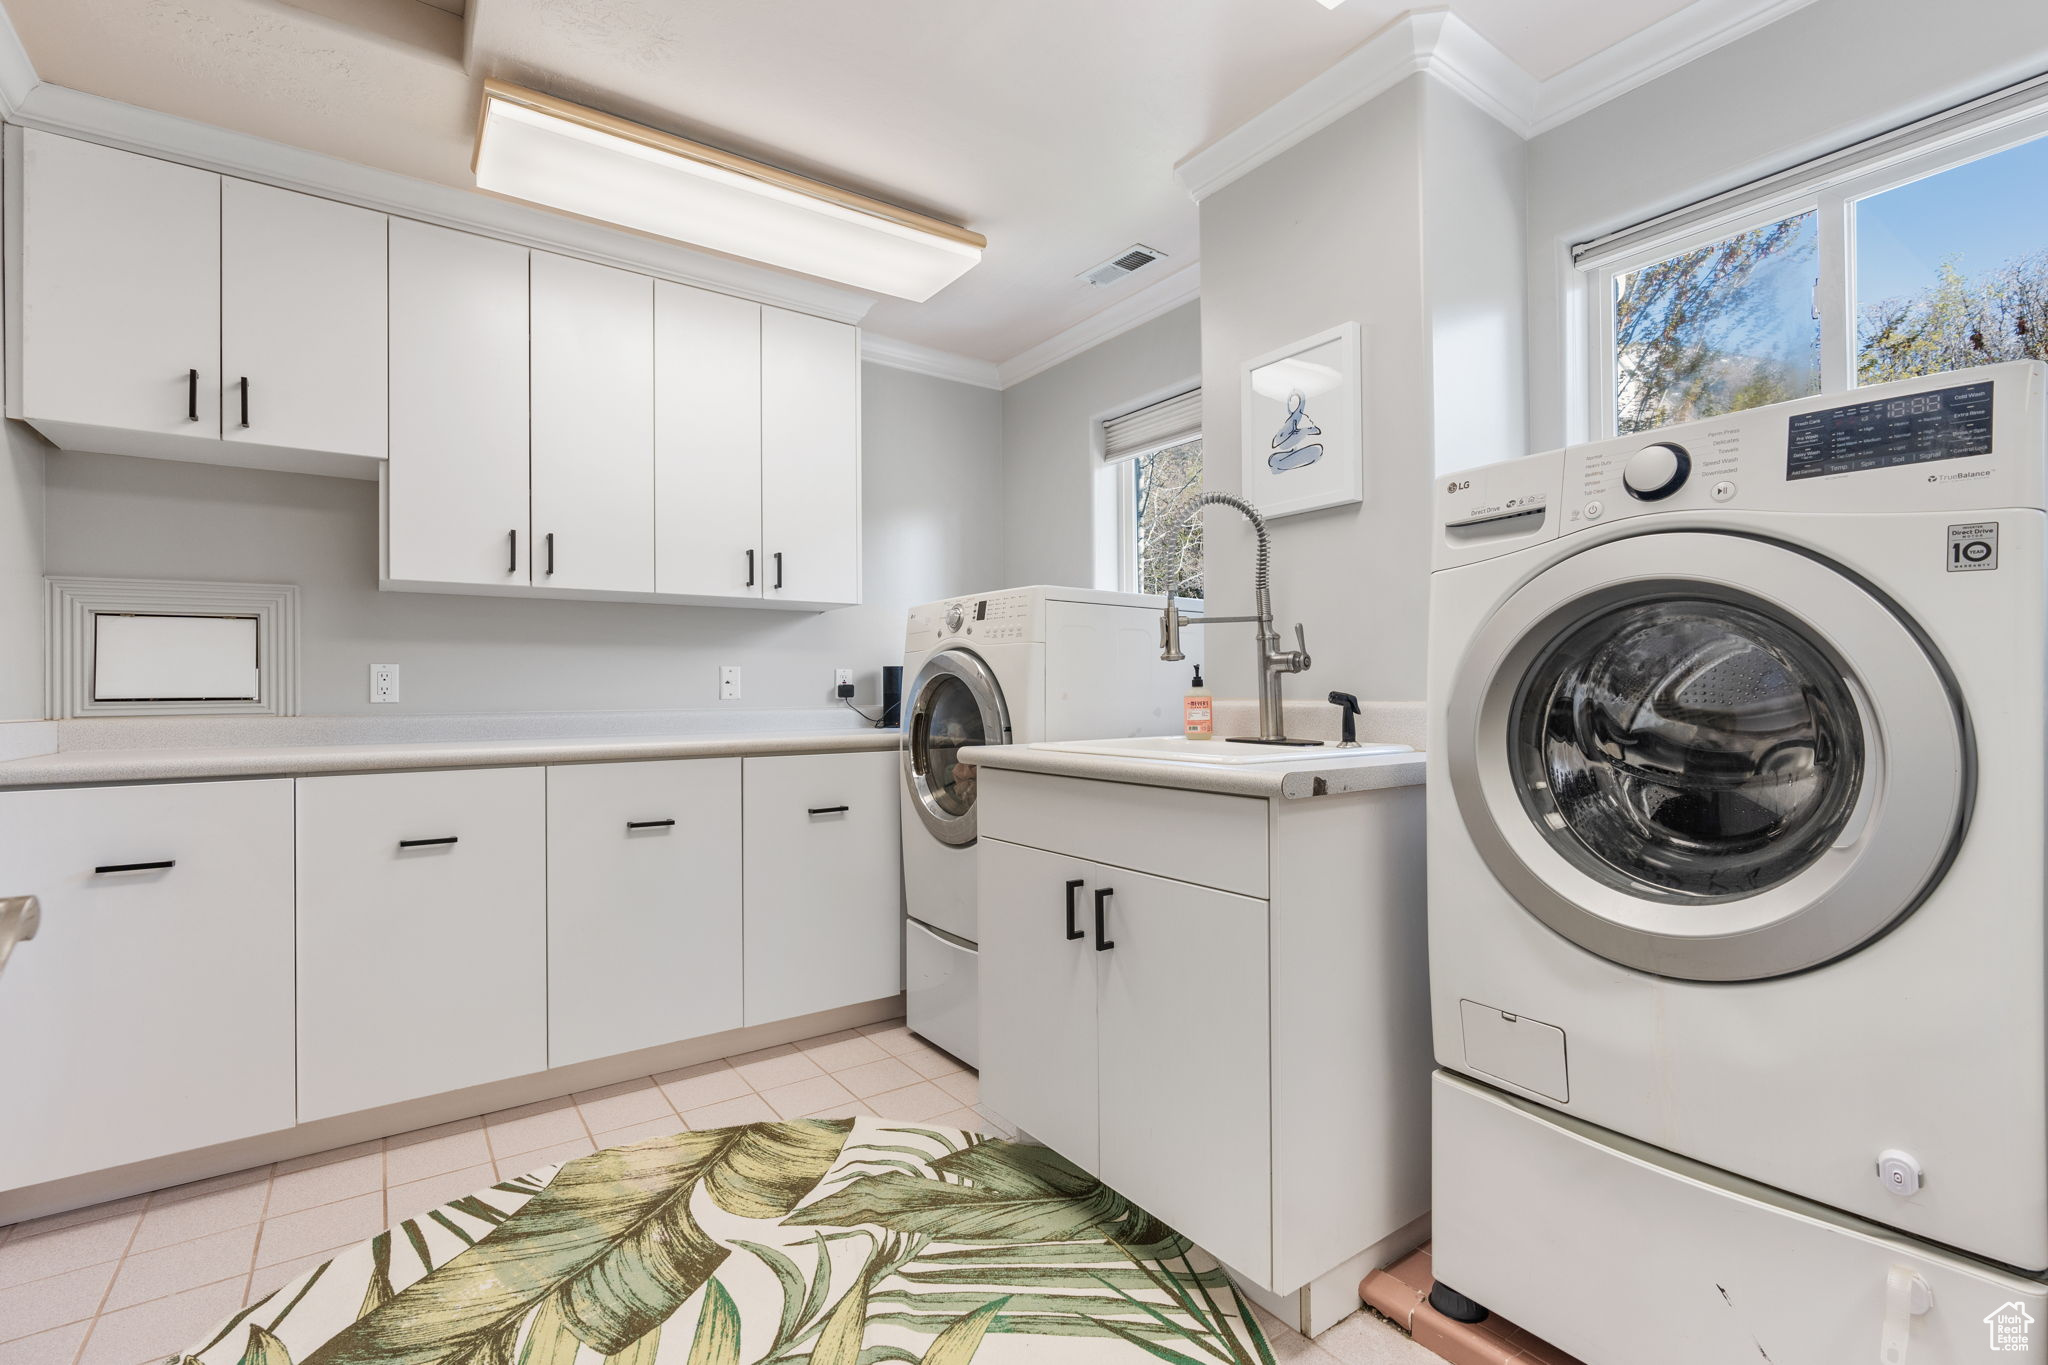 Clothes washing area featuring cabinets, light tile floors, sink, and washer and clothes dryer